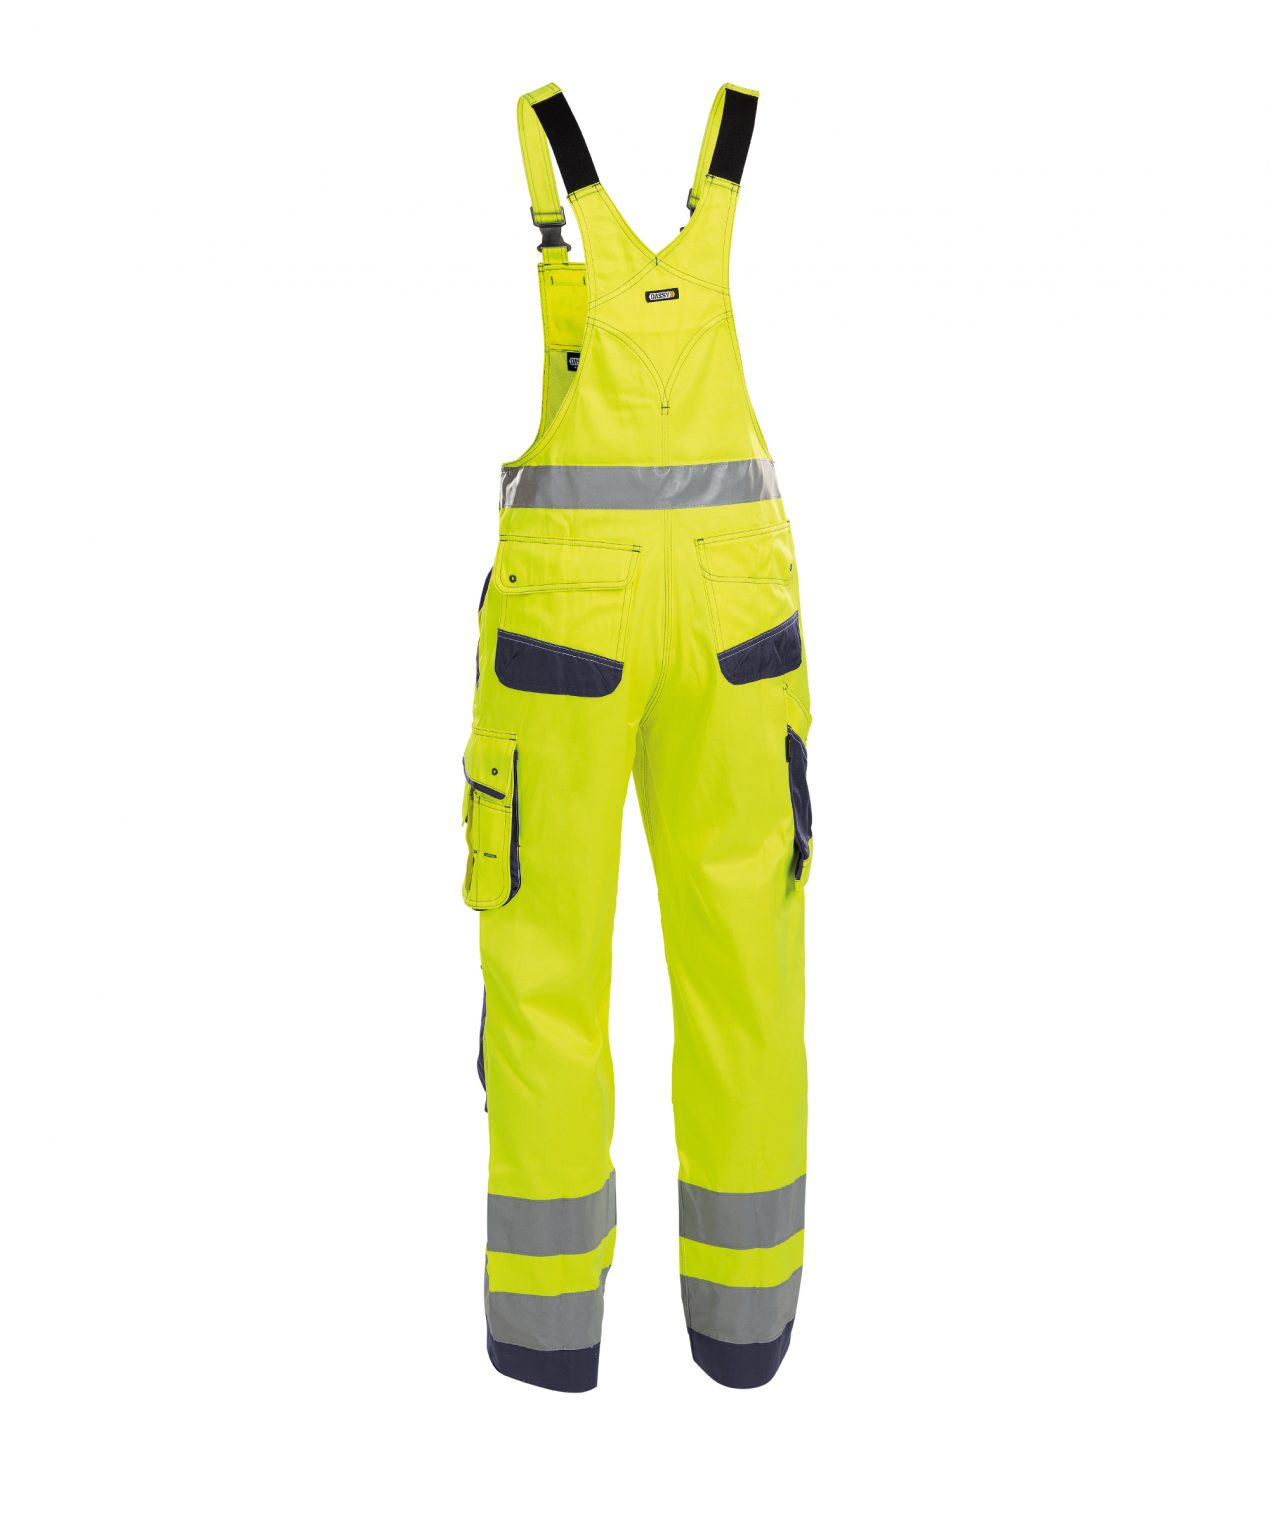 malmedy high visibility brace overall with knee pockets fluo yellow navy back